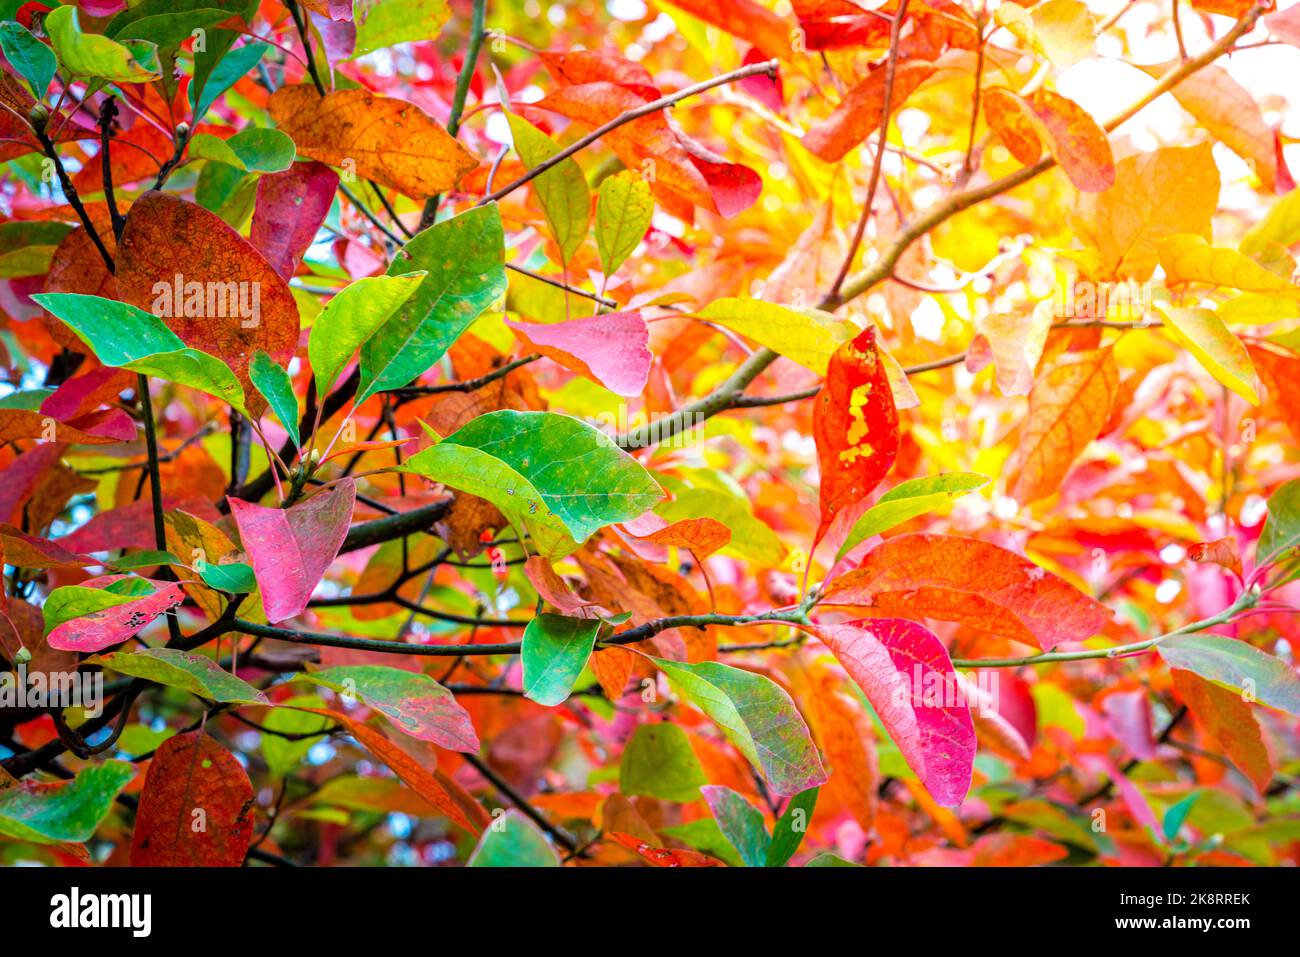 Close-up image of branches with green and red autumn leaves Stock Photo